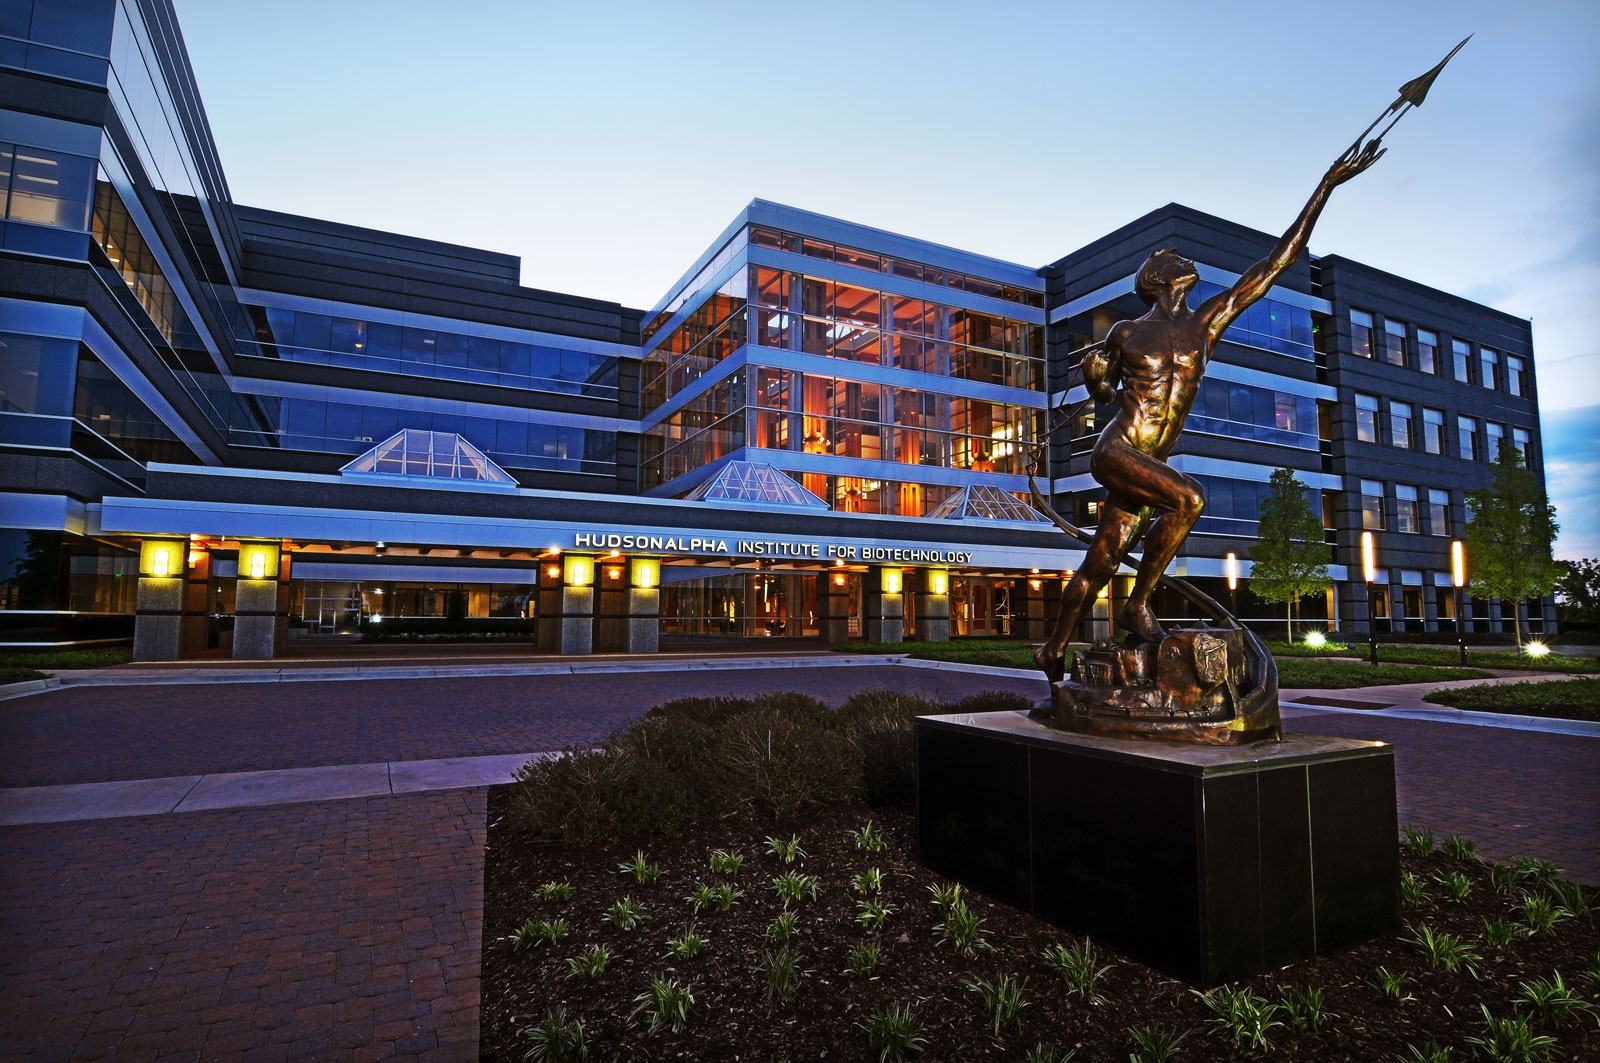 The bronze Power of Thought statue in front of HudsonAlpha